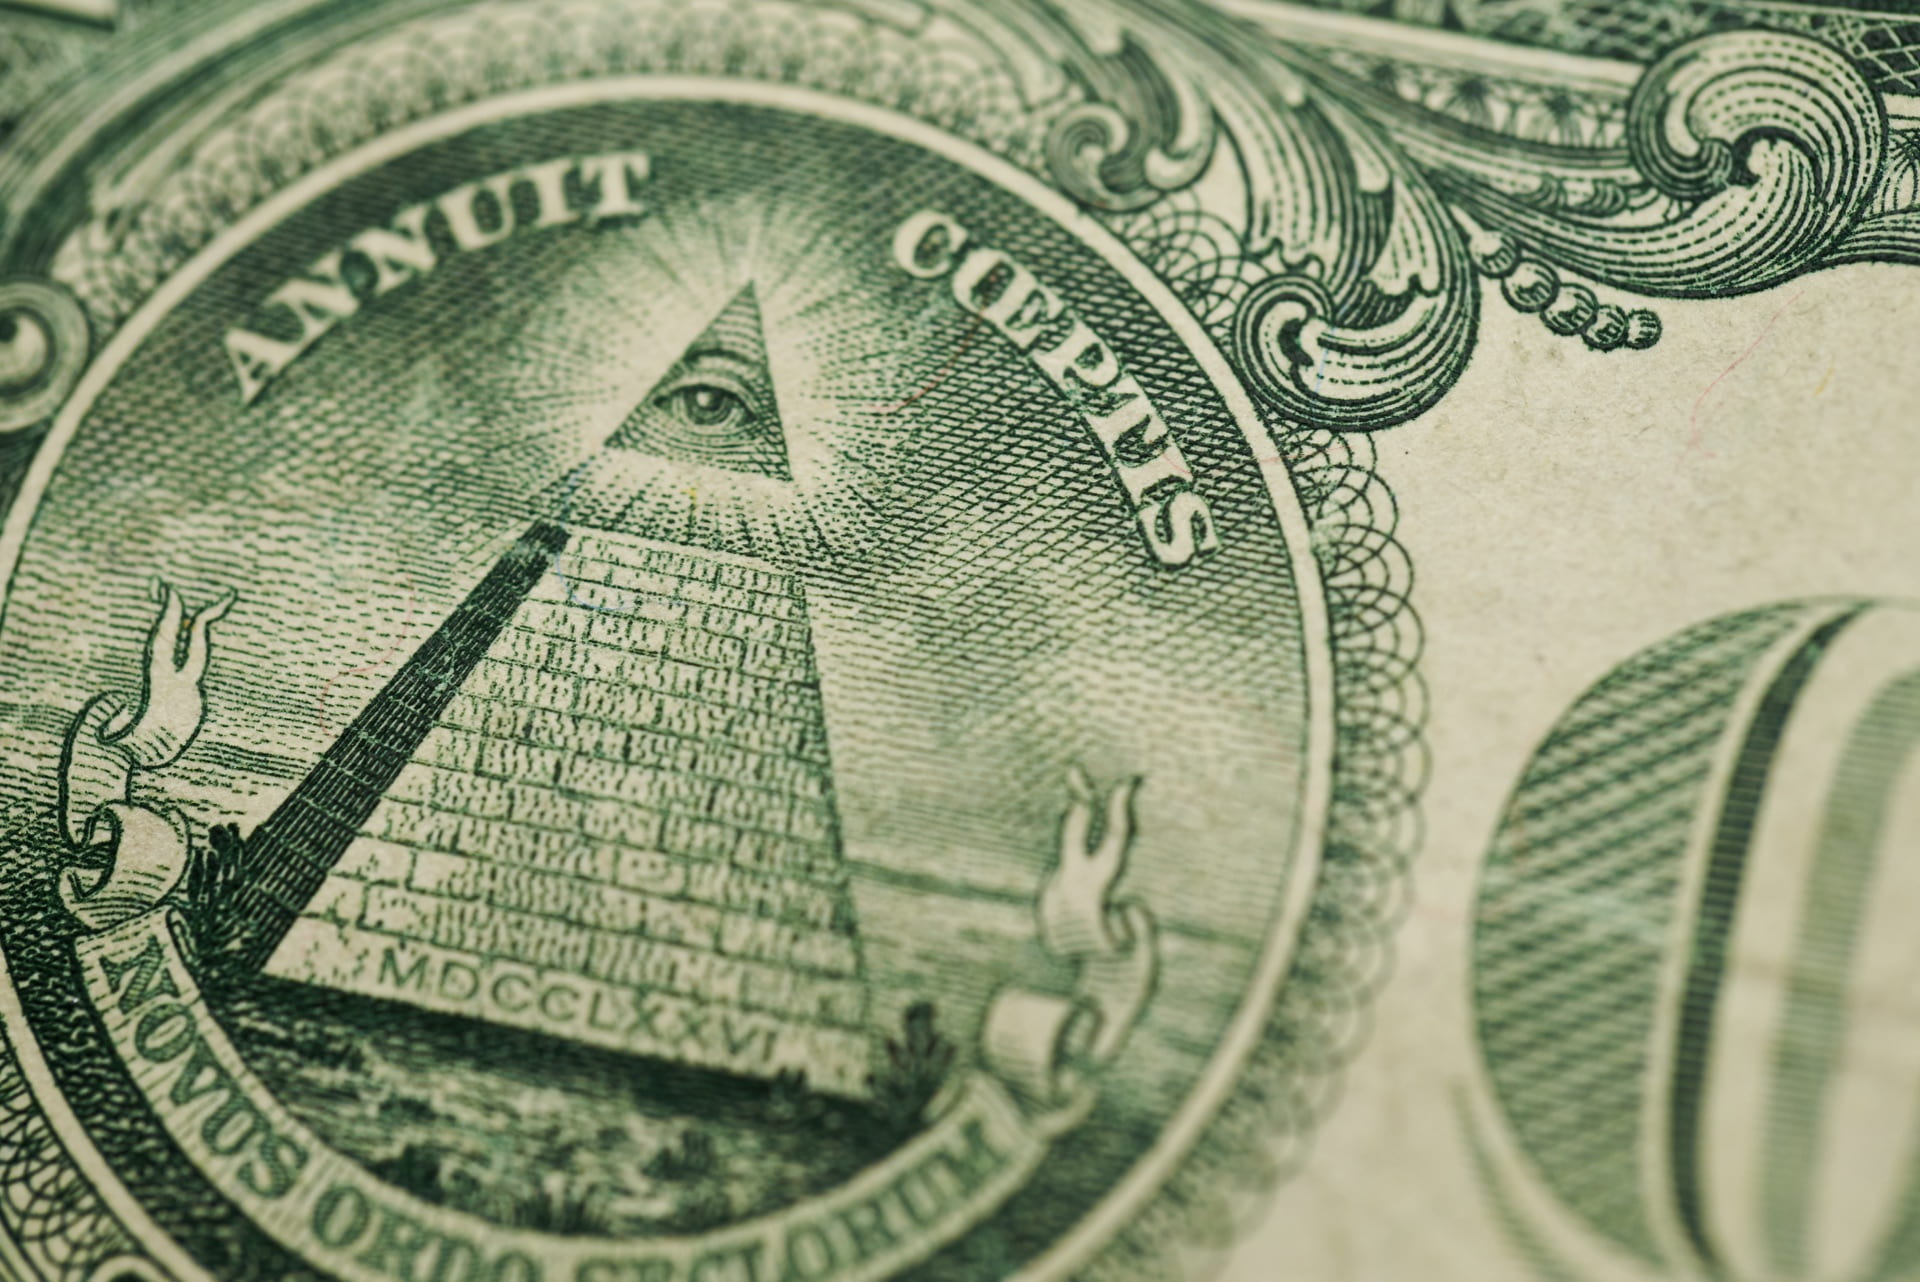 Photo of the pyramid and eye from on the back of US currency